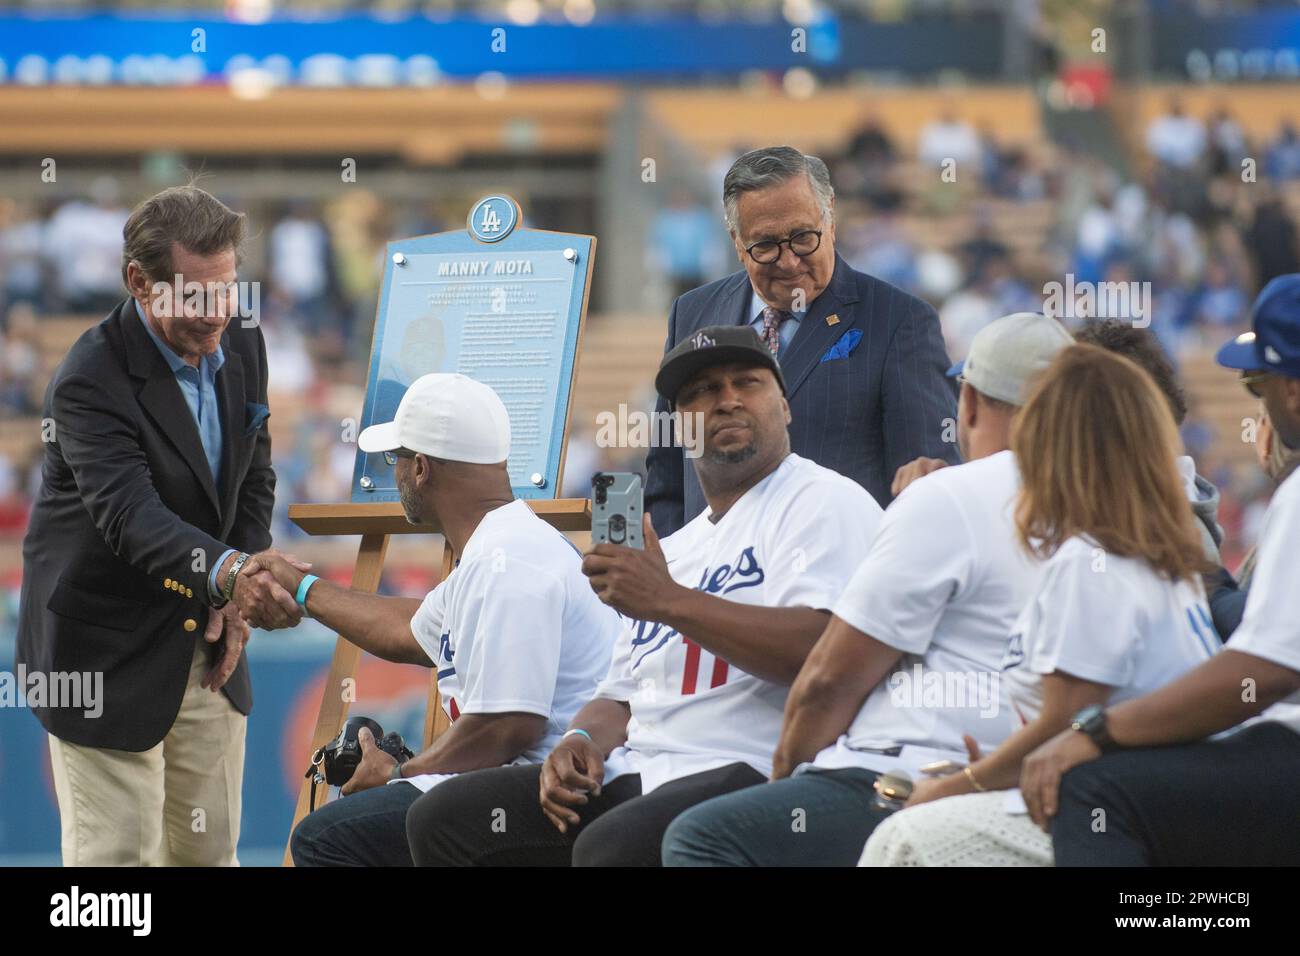 Former Los Angeles Dodger Manny Mota, right, speaks as his son Jose looks  on as he is inducted into the Legends of Dodger Baseball prior a baseball  game between the Dodgers and